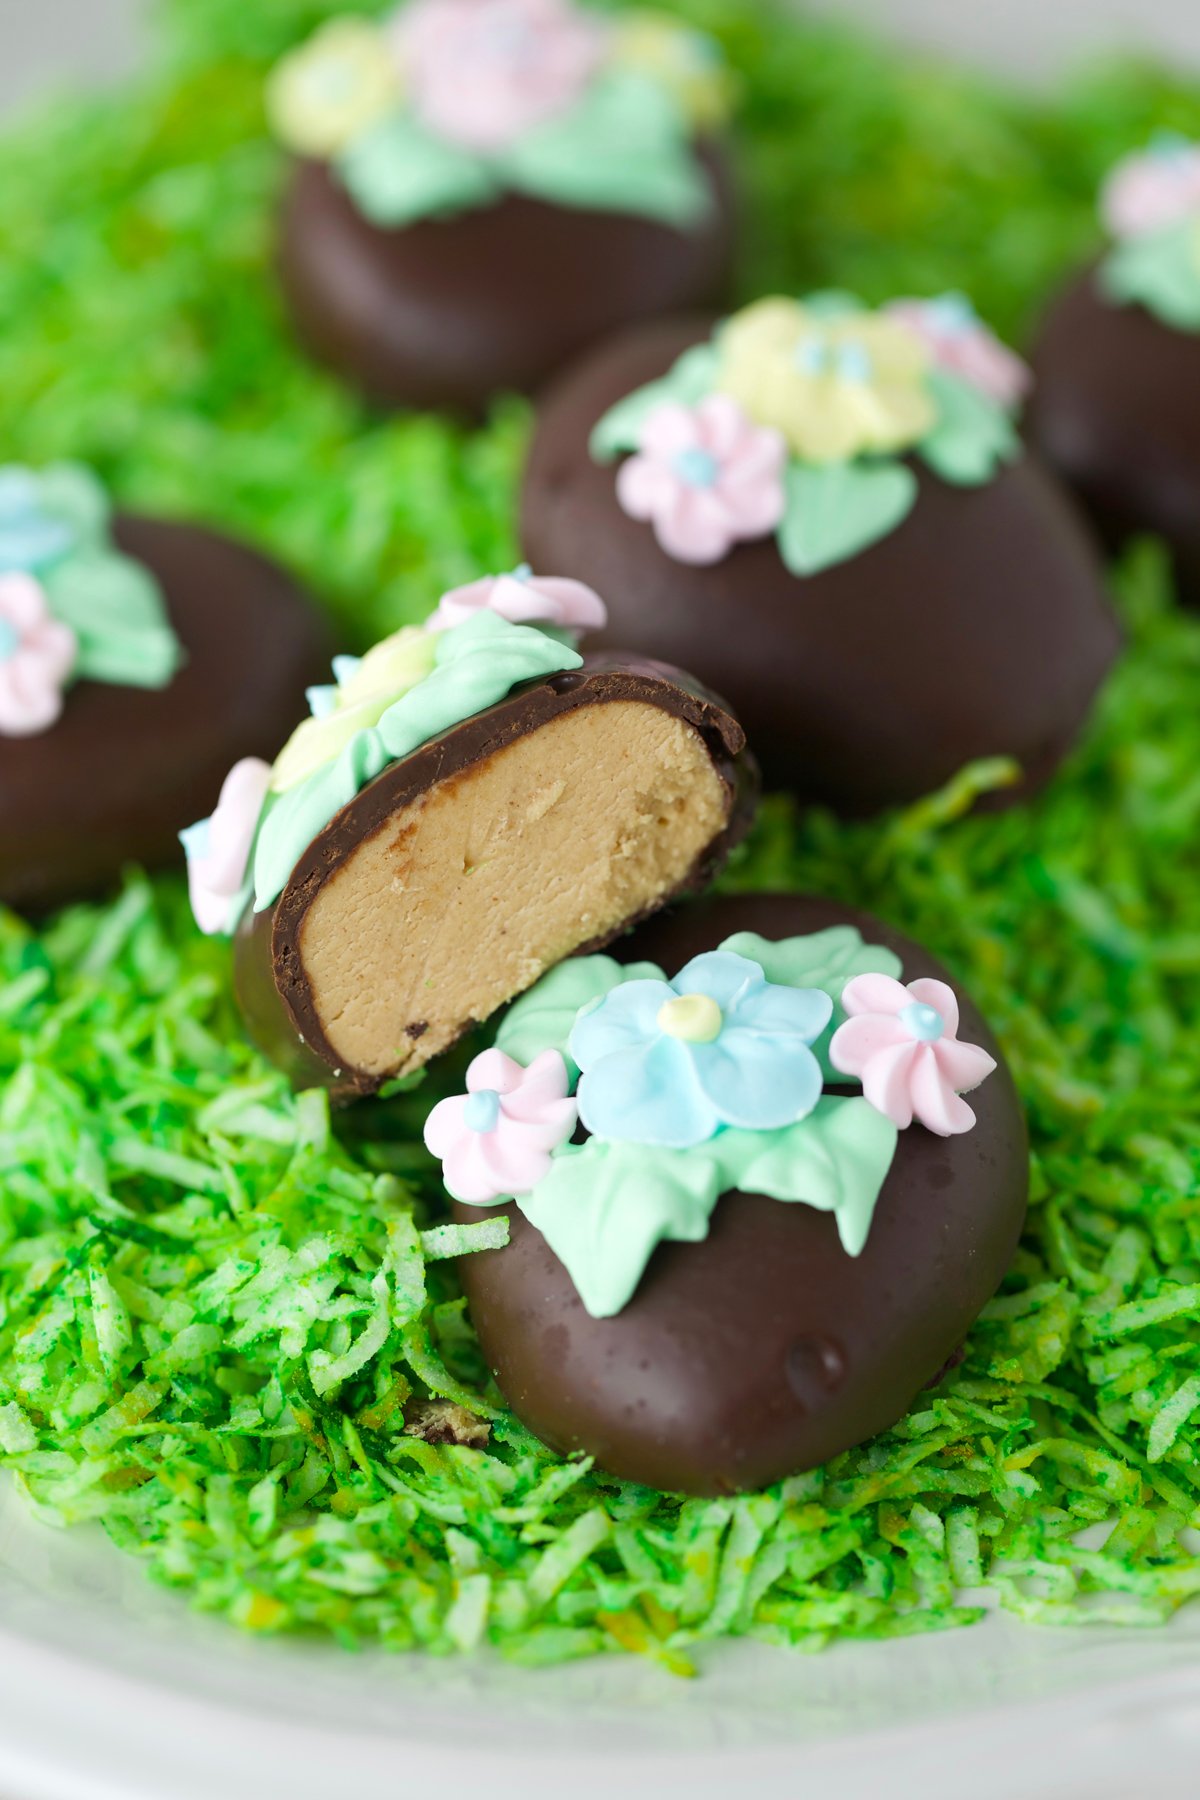 Chocolate covered copycat Reese's peanut butter egg.